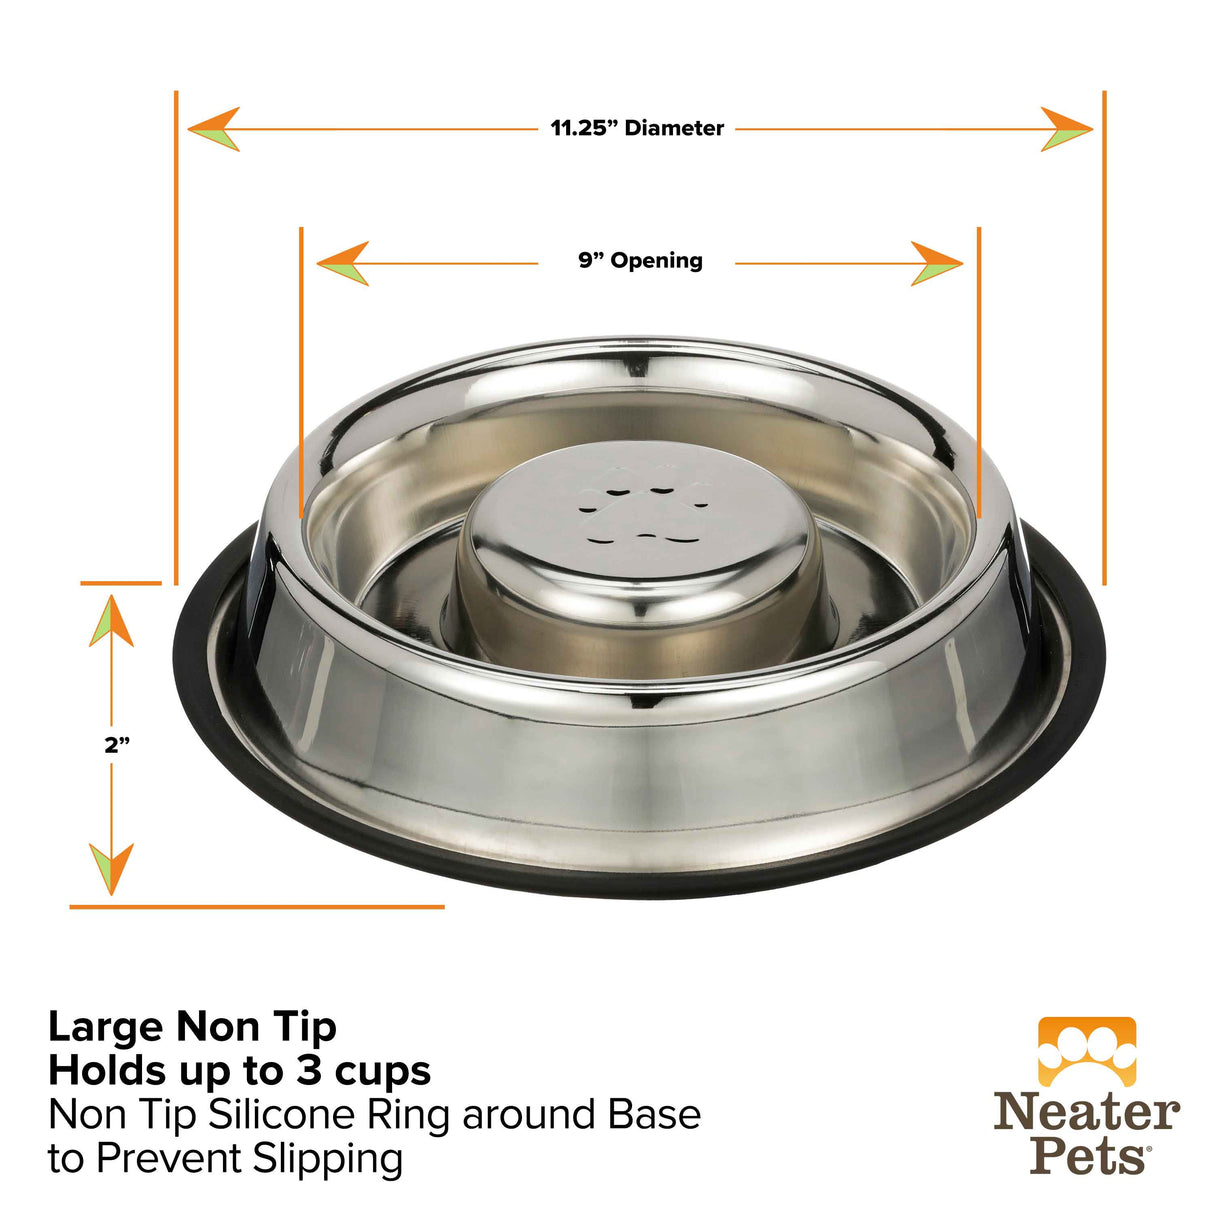 Dimensions of Large Non-Tip Stainless Steel Slow Feed Bowl: 2 inches tall, 9 inches in the opening, 11.25 inches in the diameter